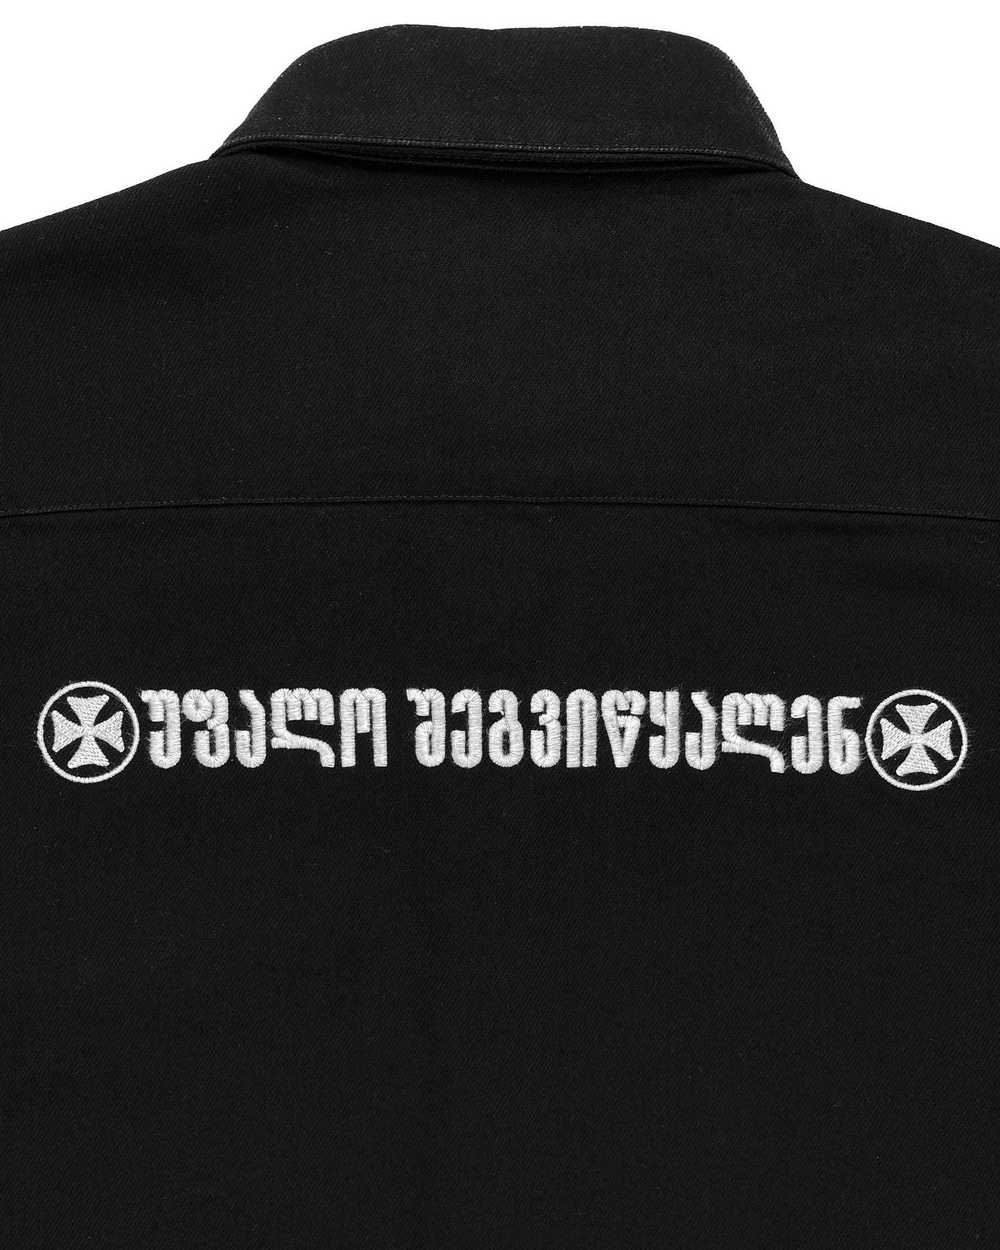 Vetements SS19 Vetements “Forgive Us” Embroidered… - image 2